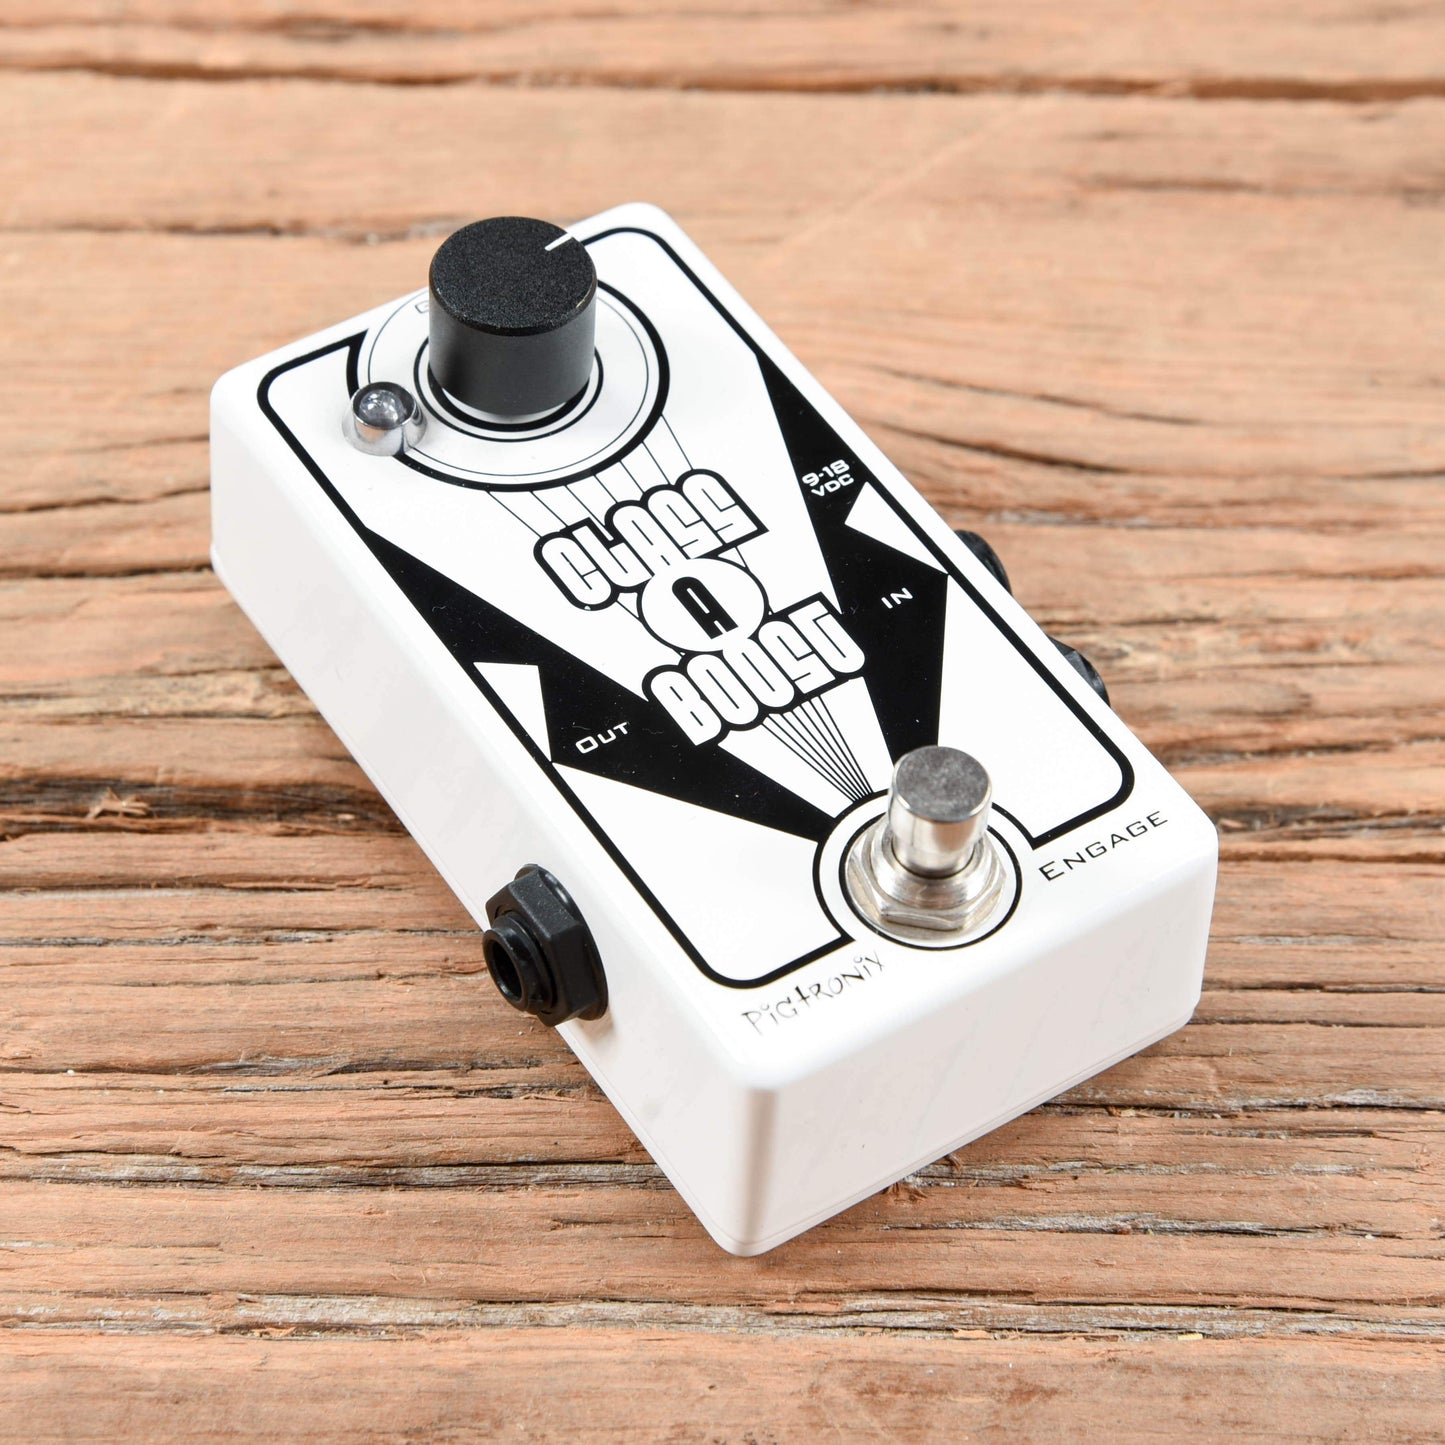 Pigtronix Class A Boost Effects and Pedals / Overdrive and Boost